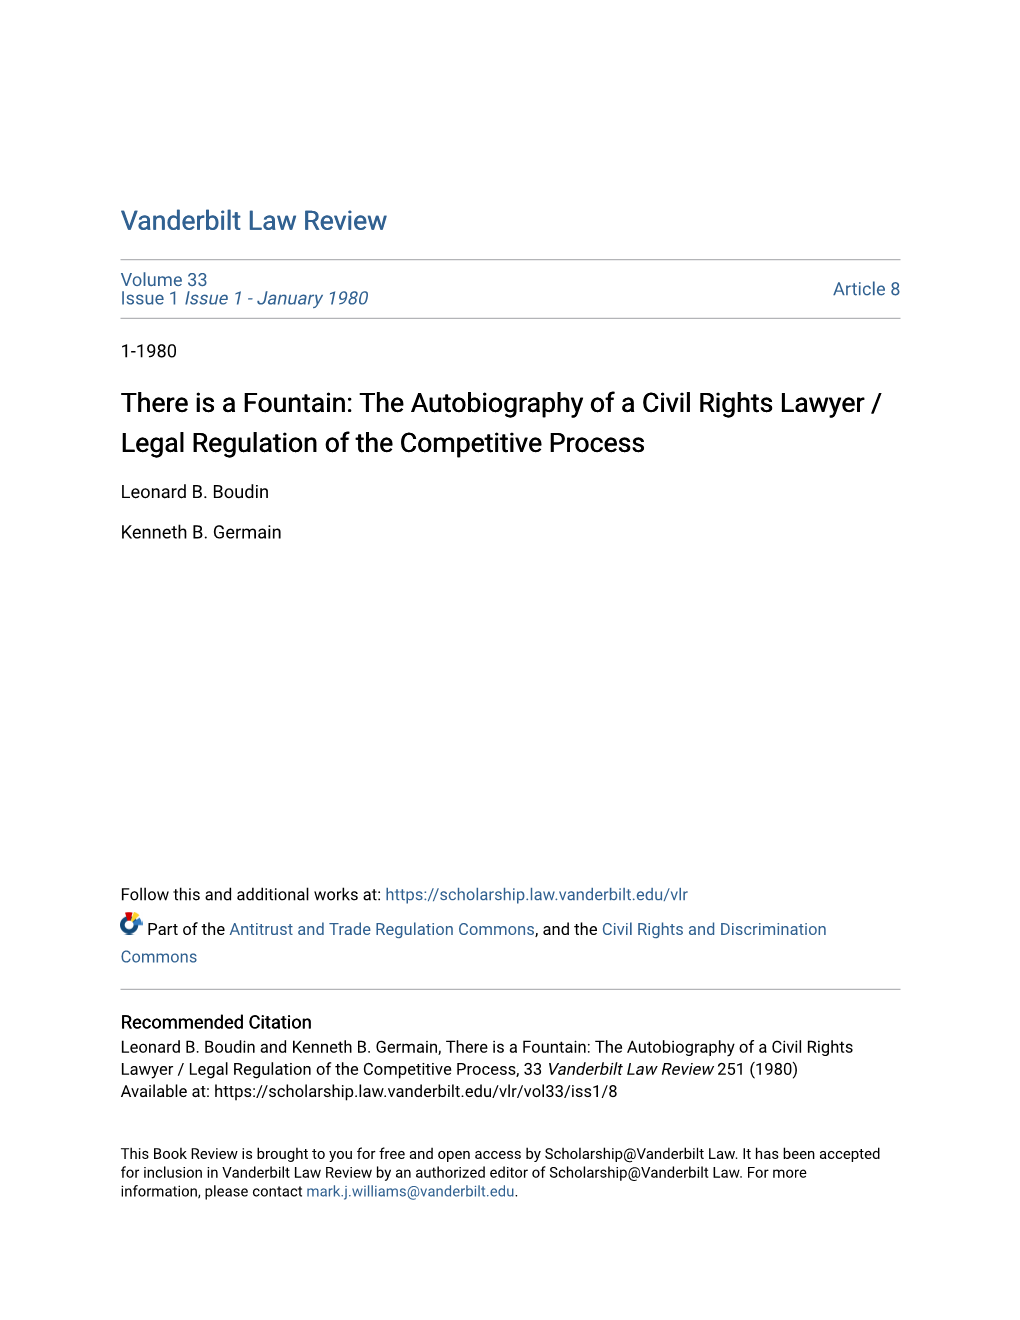 The Autobiography of a Civil Rights Lawyer / Legal Regulation of the Competitive Process